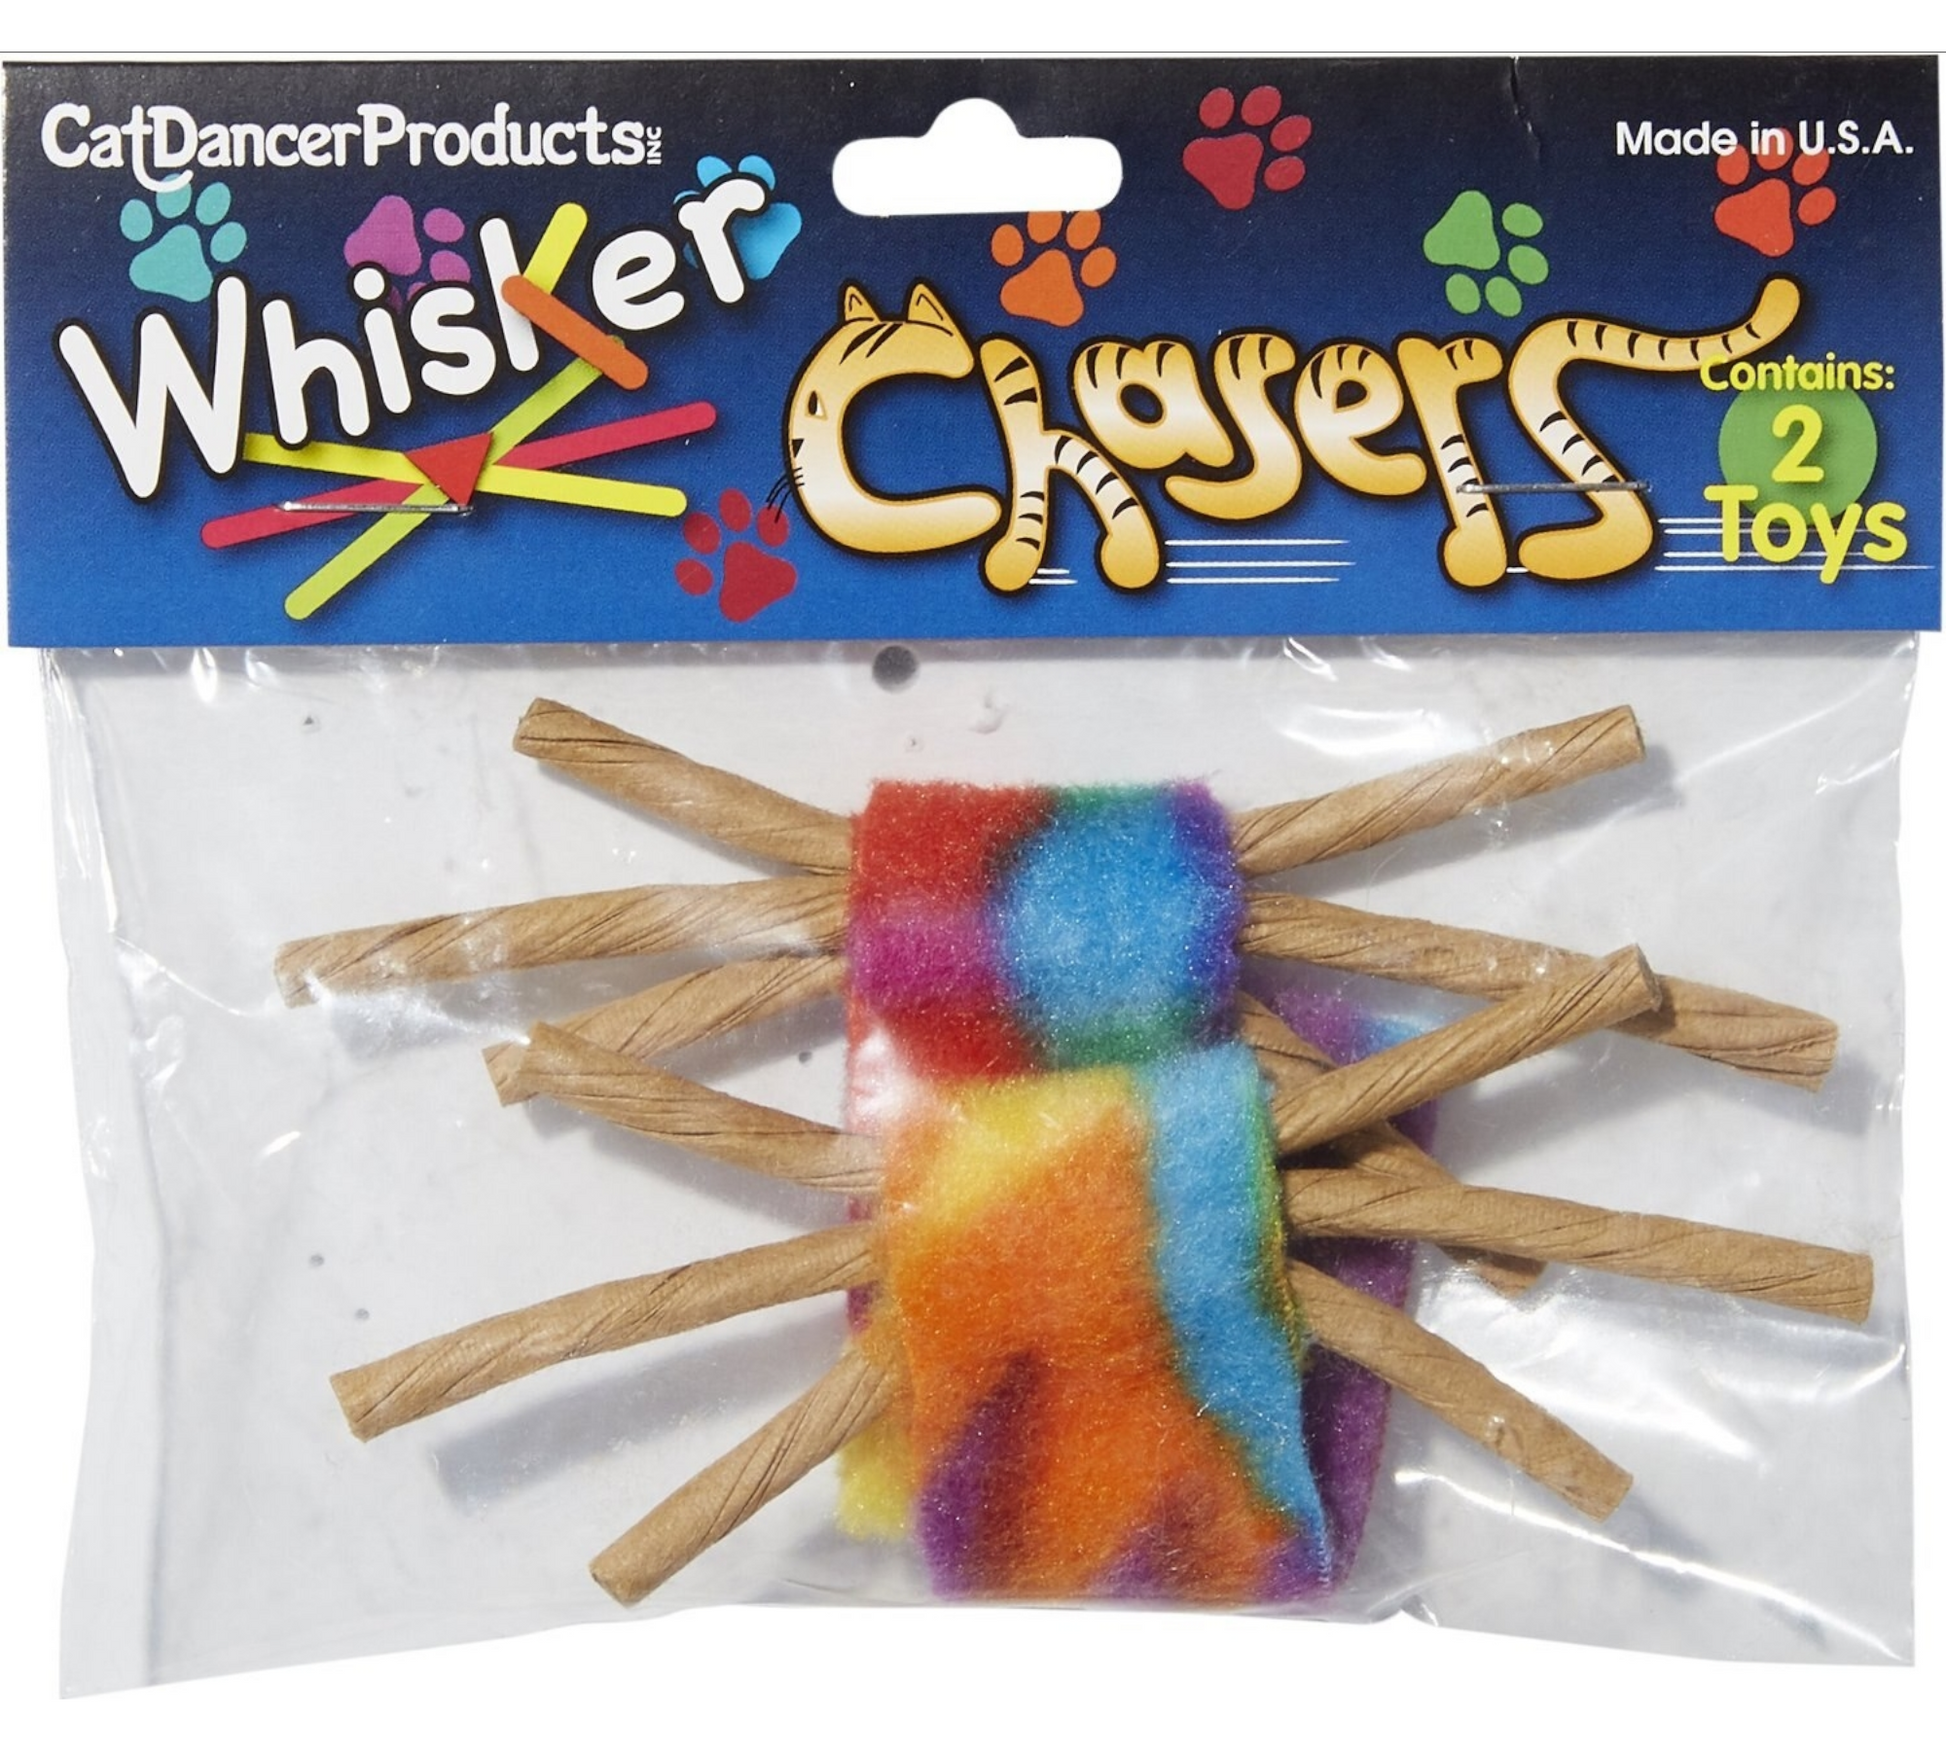 Canine's World Cat Balls & Chaser Toys Cat Dancer Whisker Chasers Cat Toy, 2 count Cat Dancer